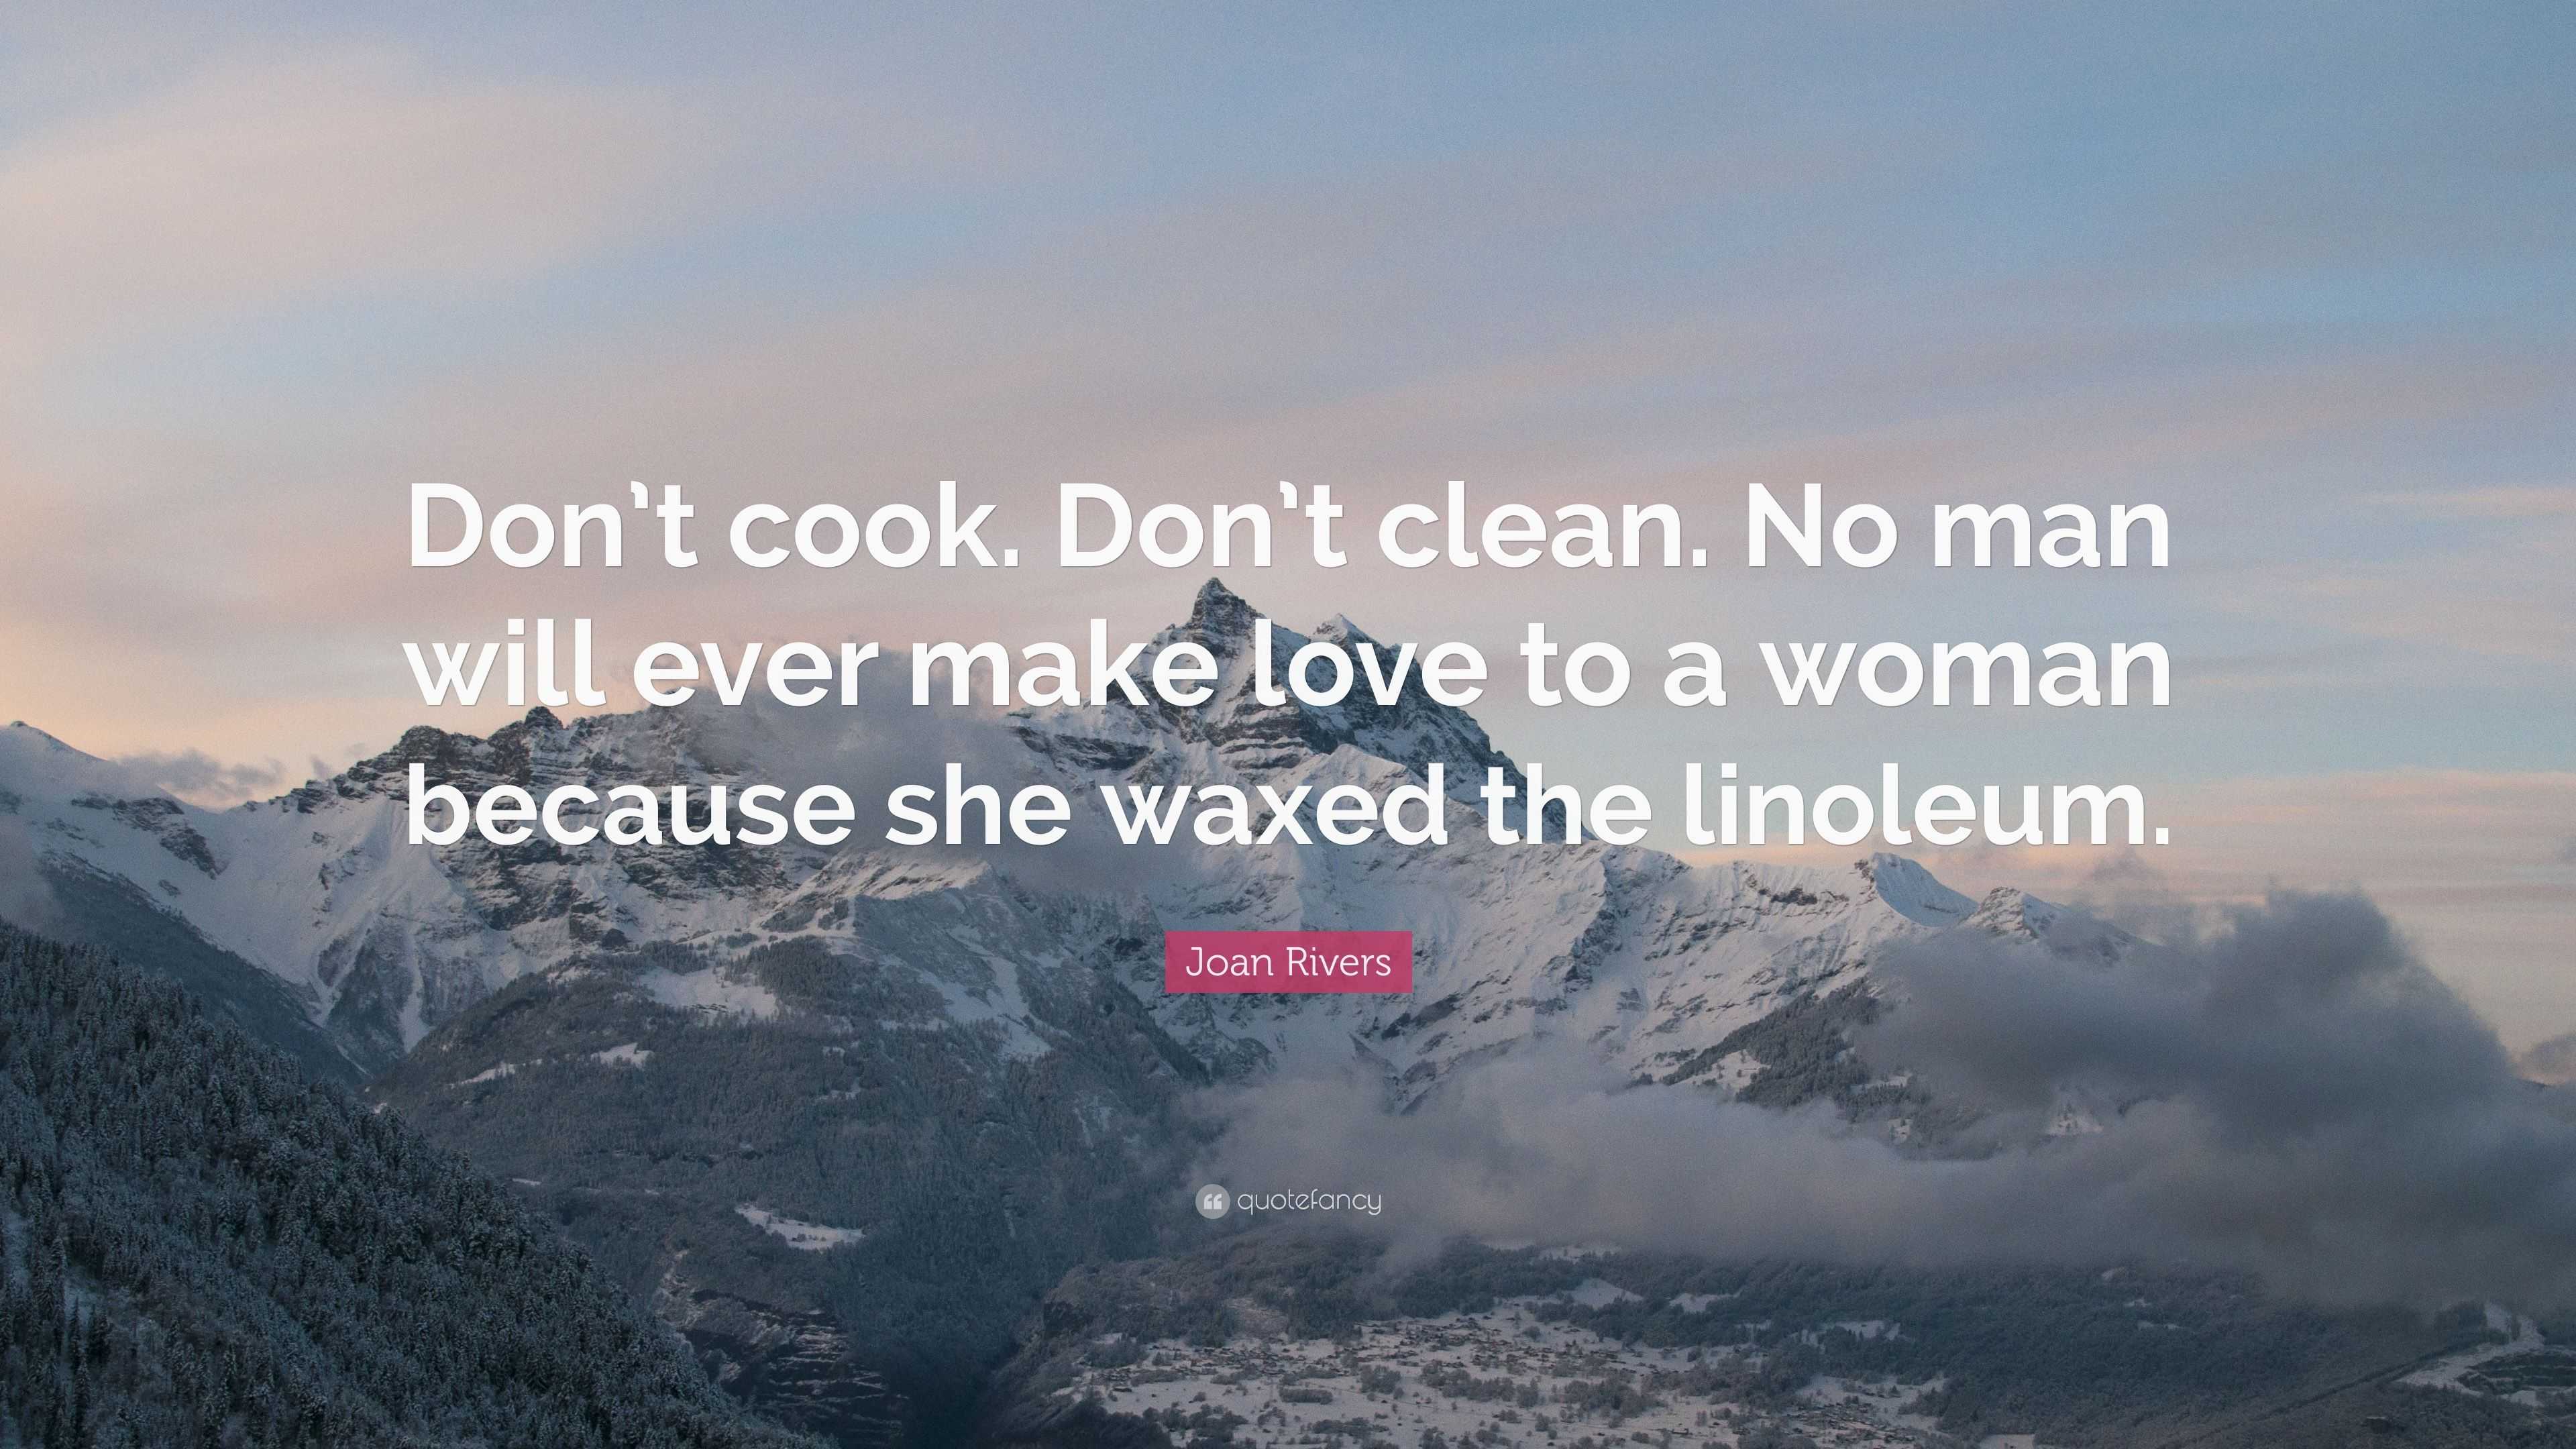 Joan Rivers Quote “Don t cook Don t clean No